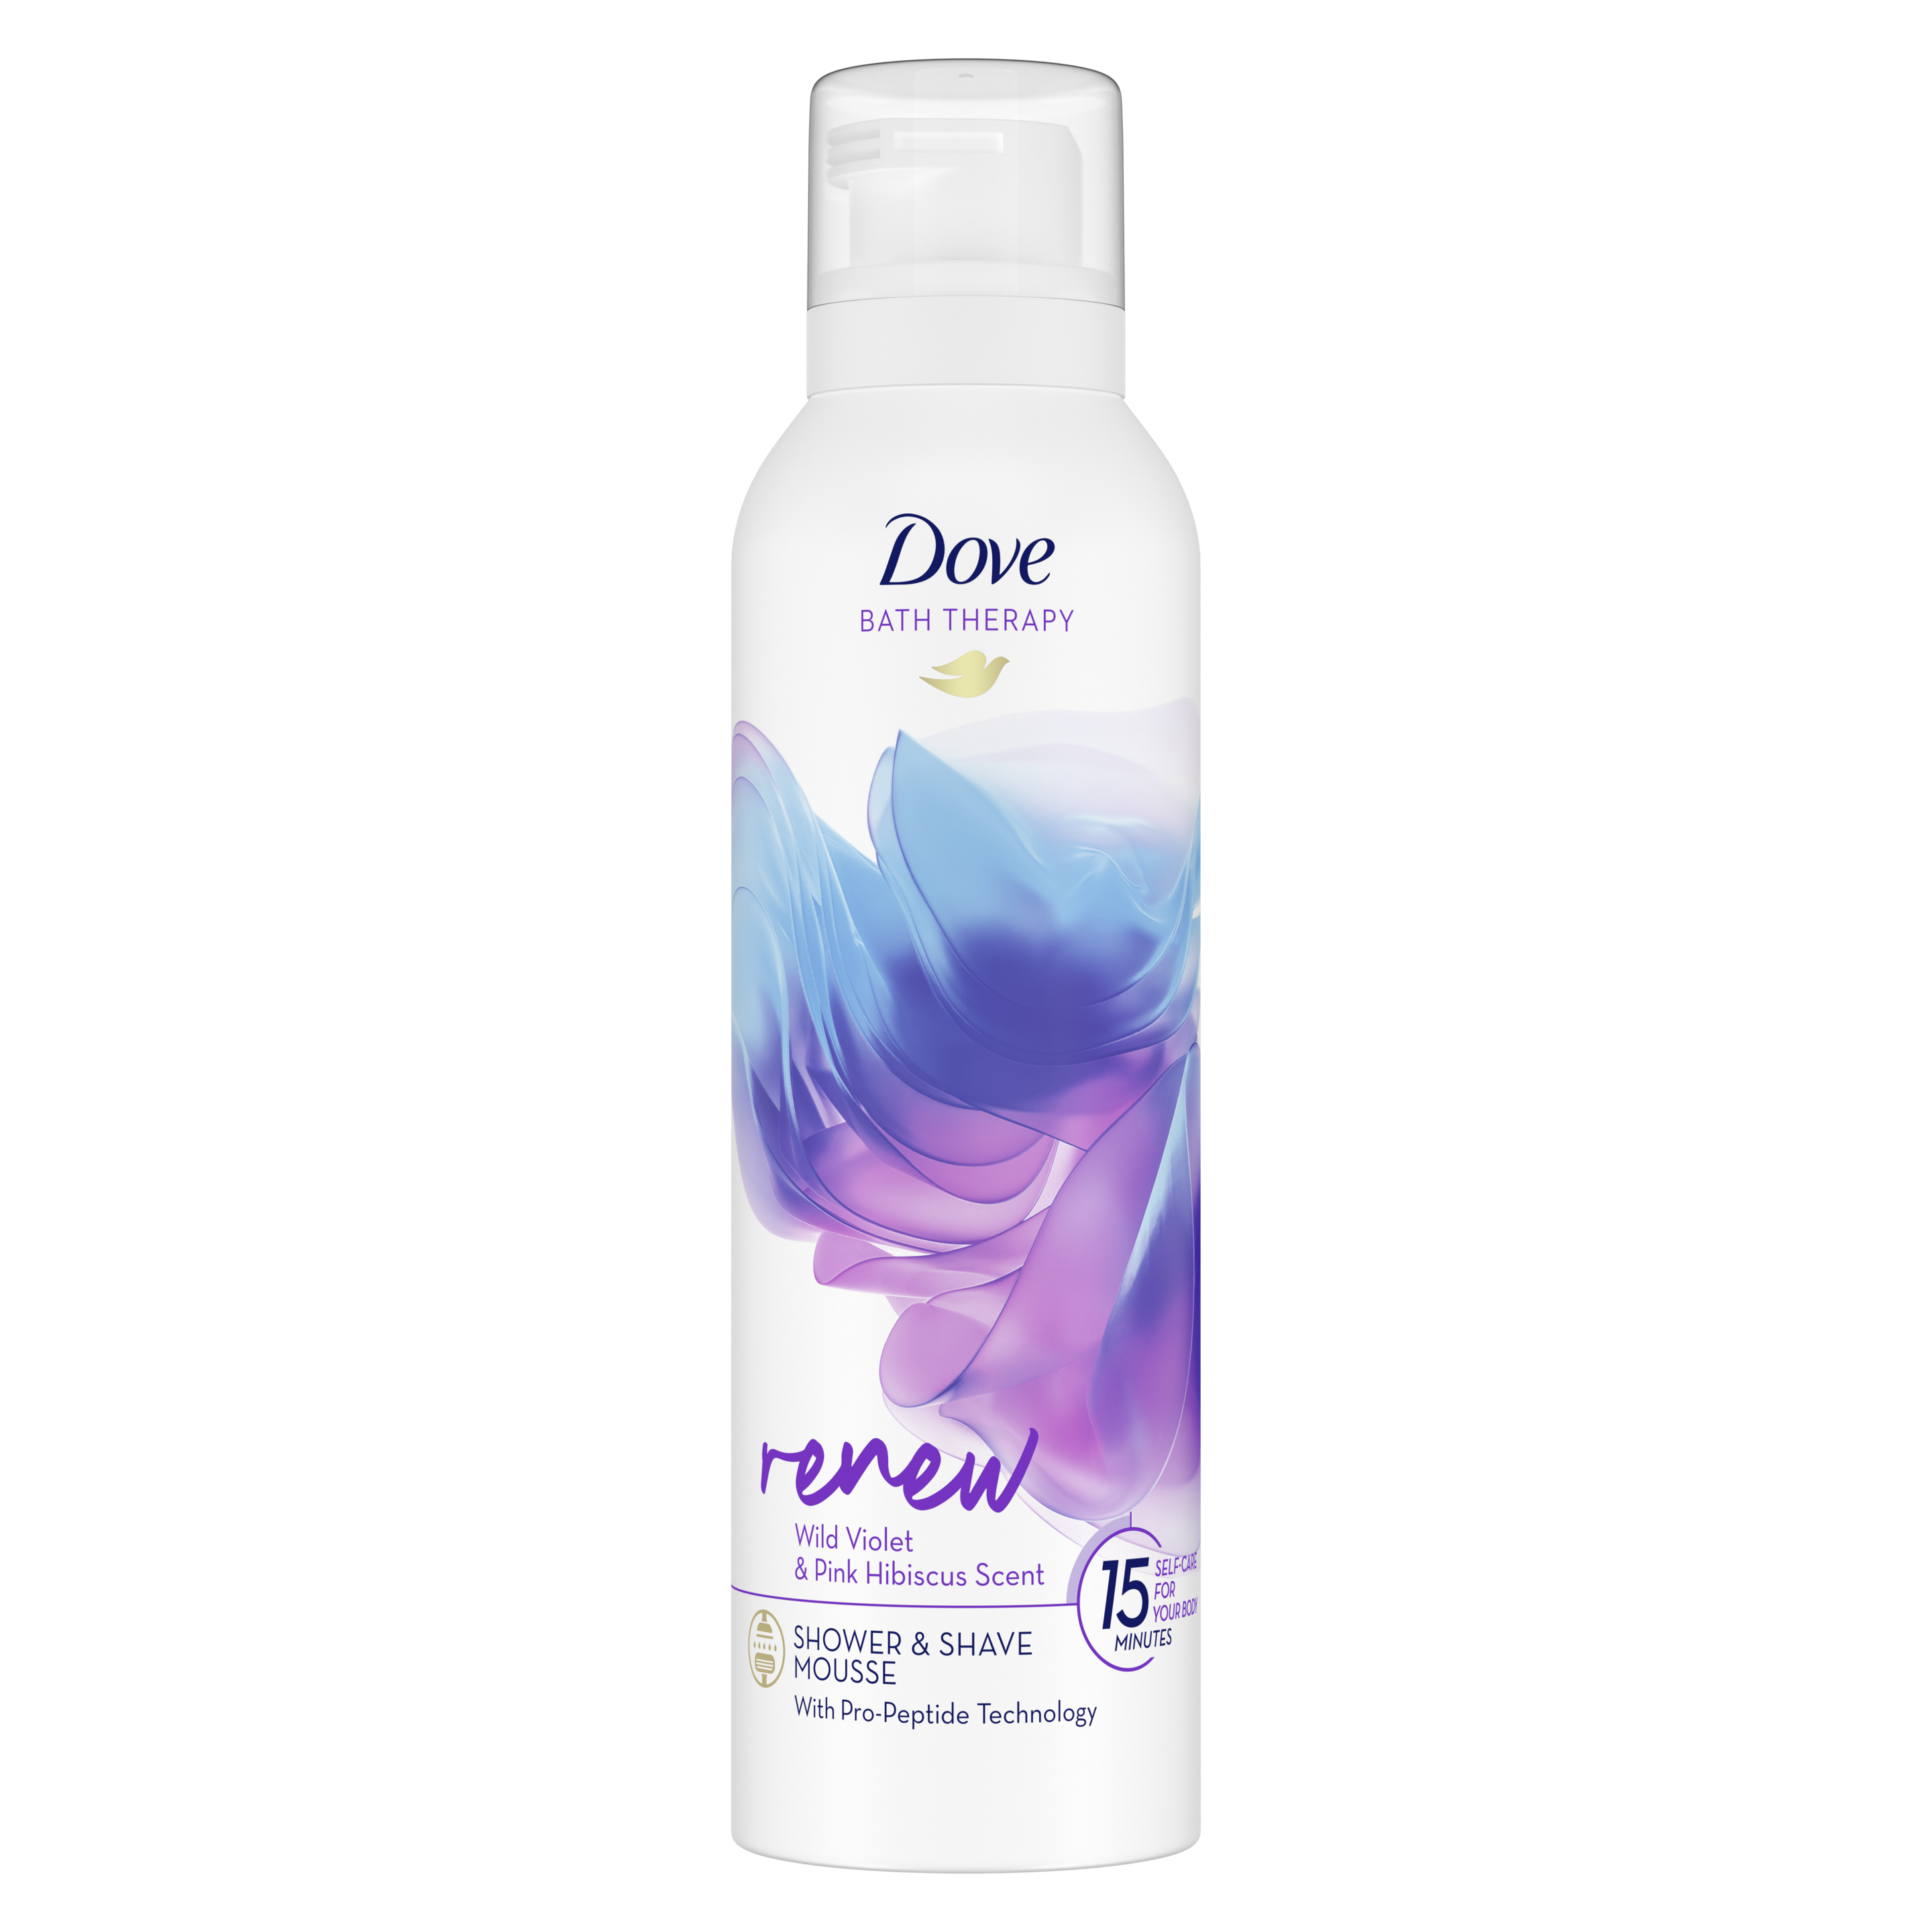 Dove Renew Shower & Shave Mousse Foam with Pro-Peptide Technology 200 ml